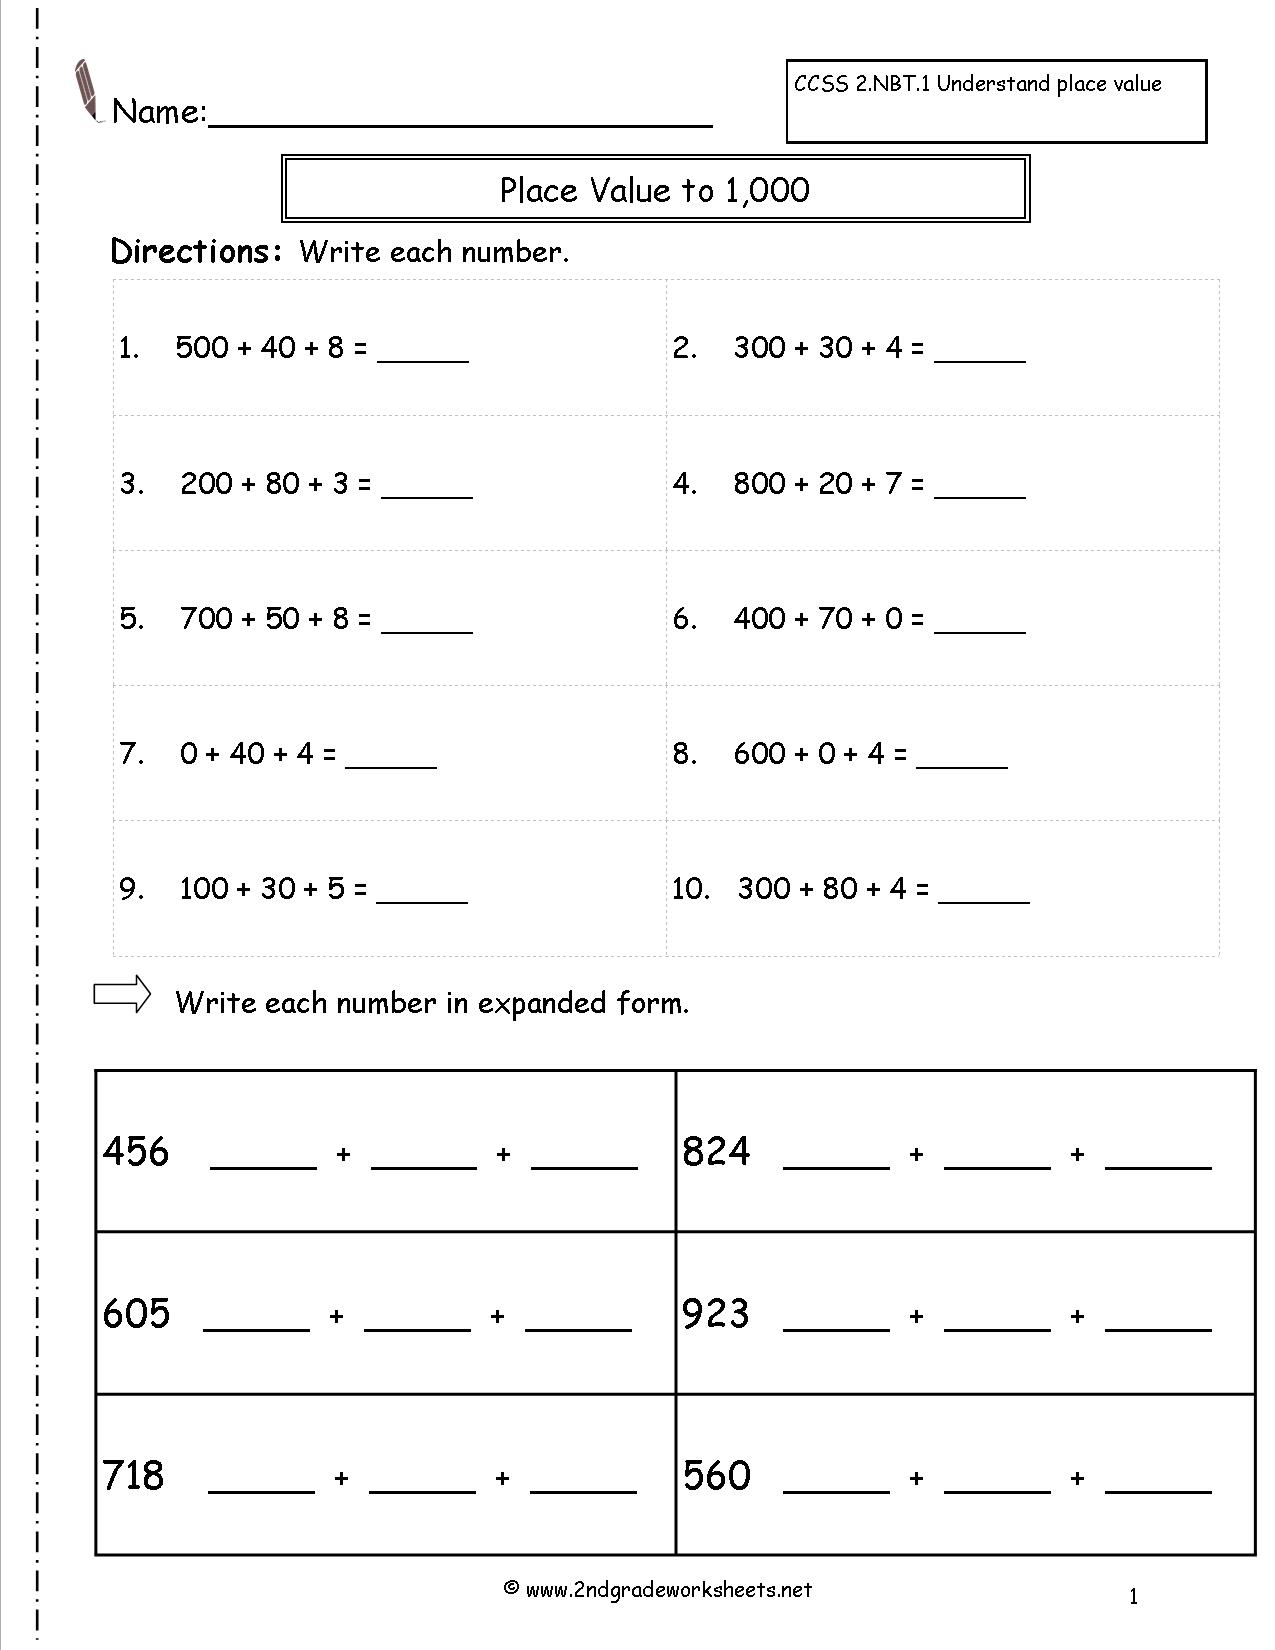 expanded-form-fill-in-the-chart-to-show-how-many-hundreds-tens-and-common-core-worksheets-for